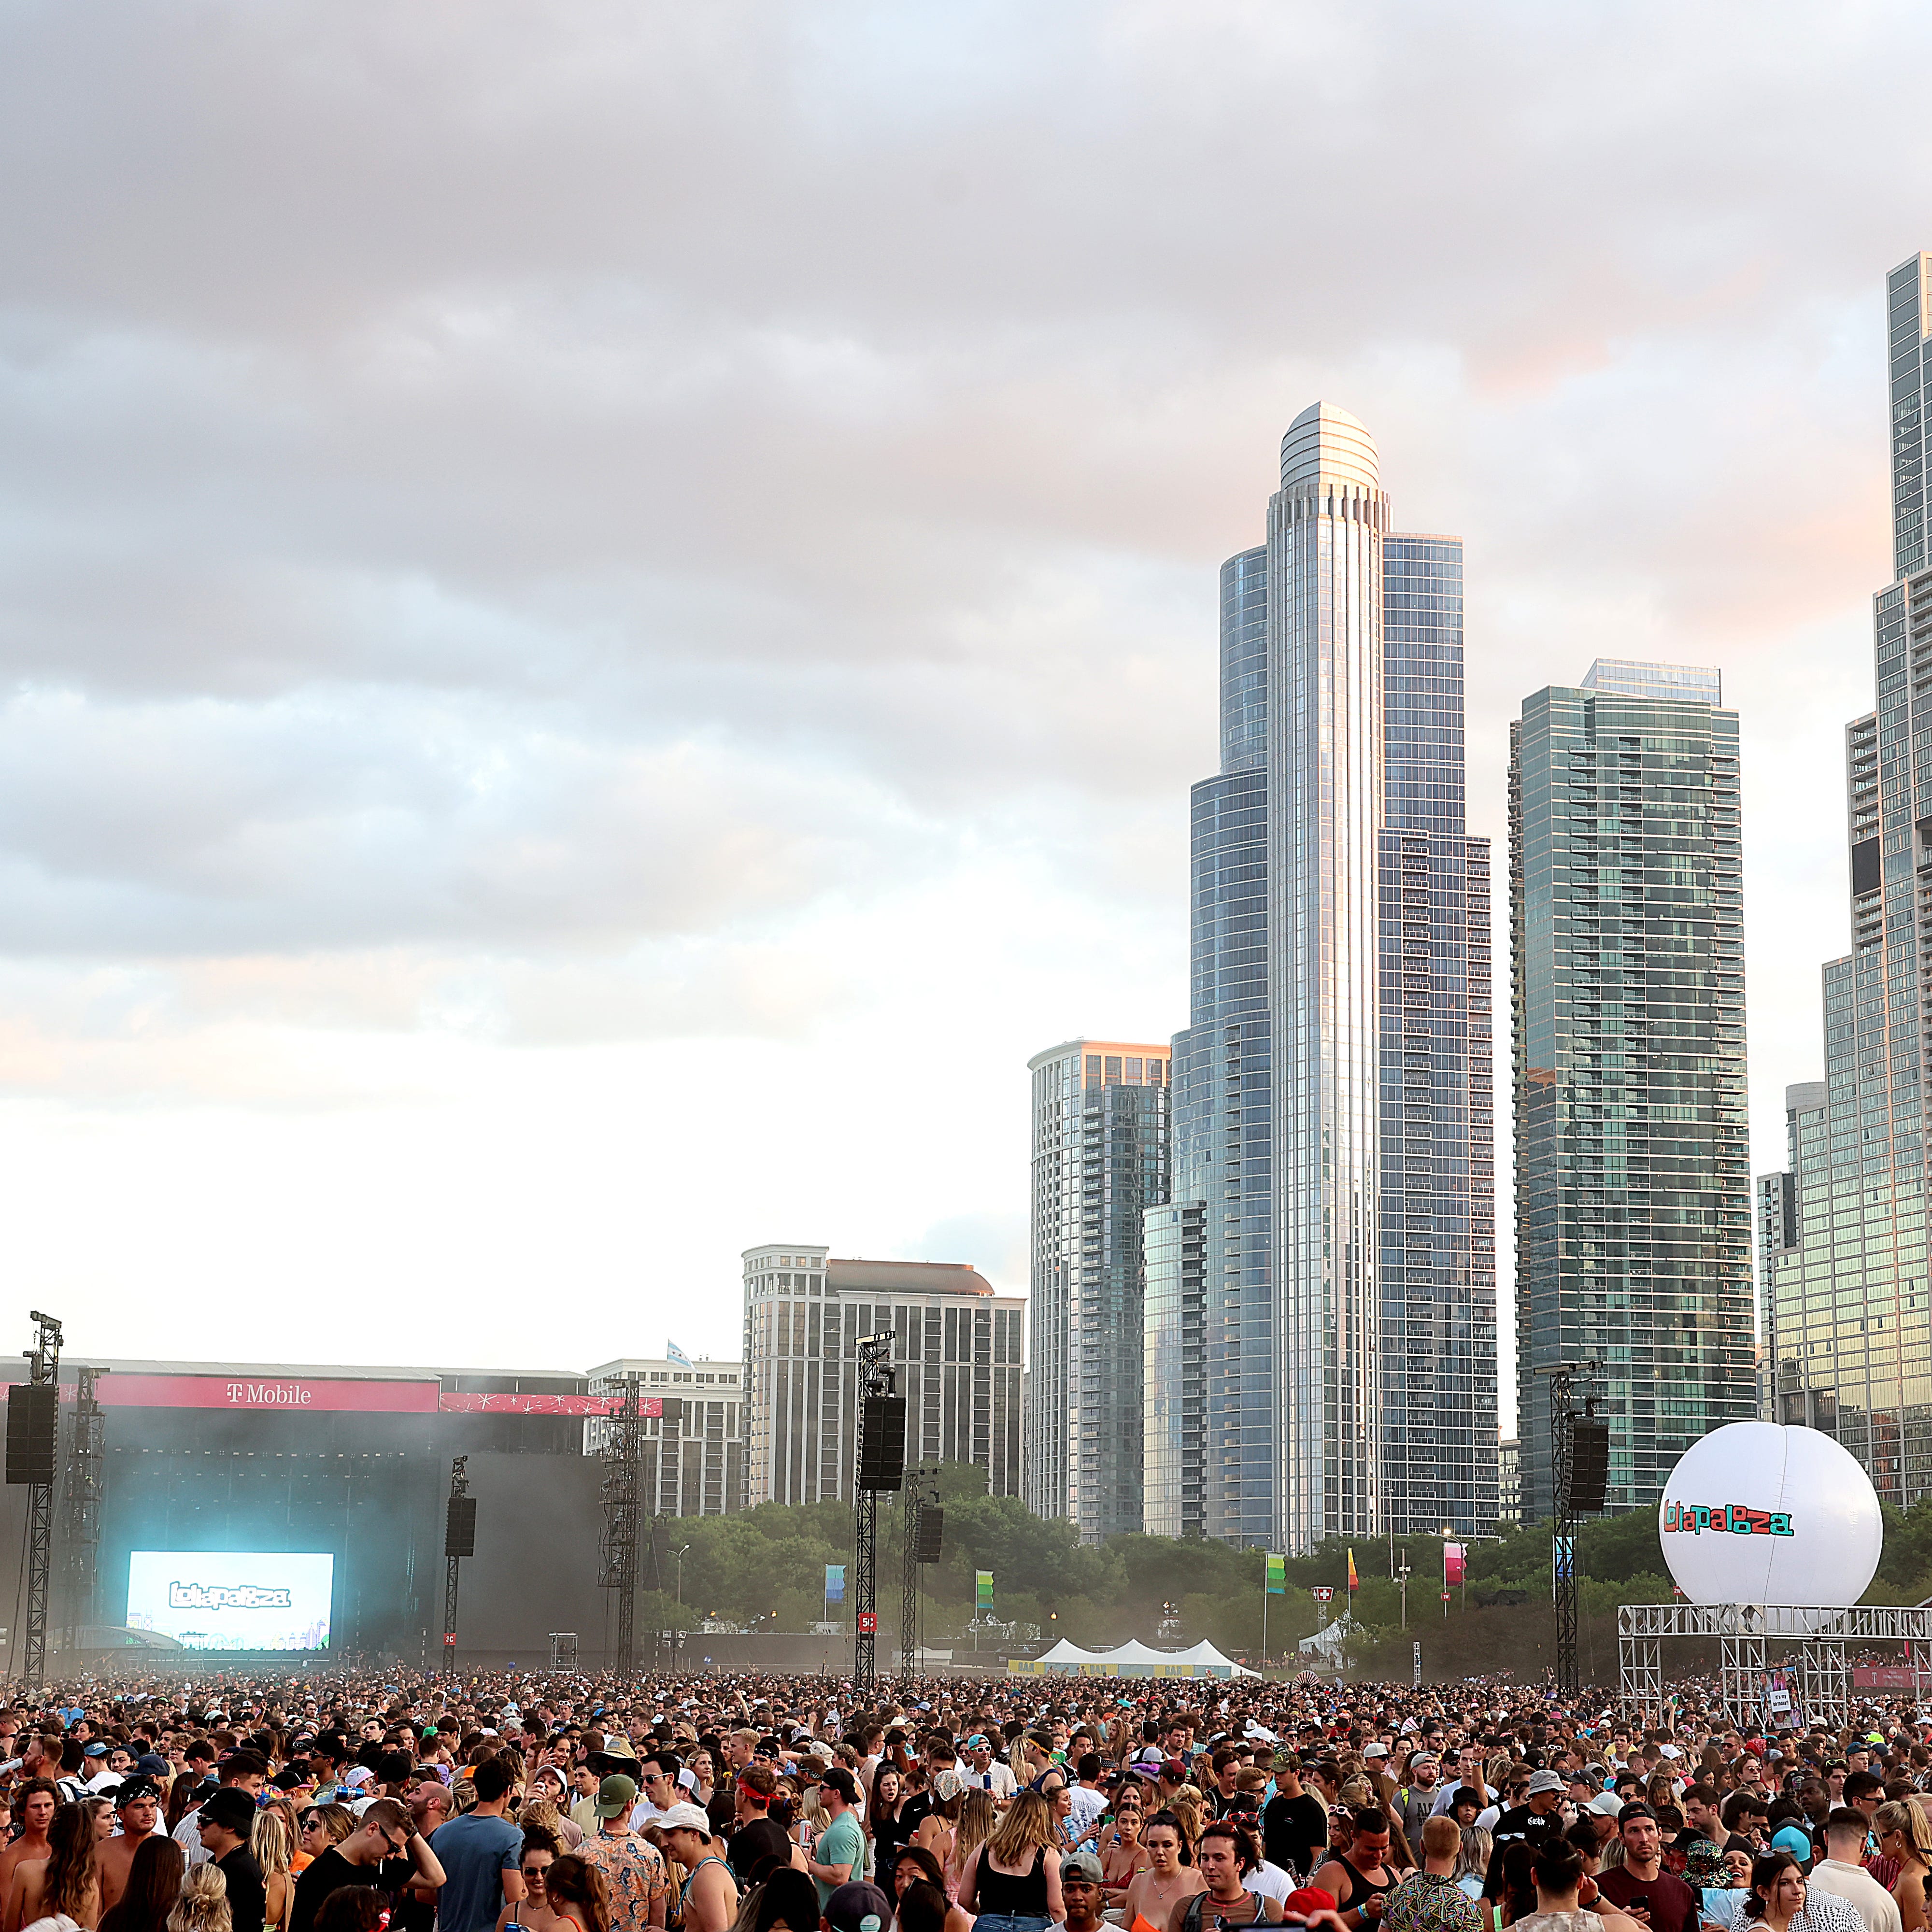 A general view of the atmosphere during day 3 of Lollapalooza at Grant Park on July 30, 2022 in Chicago, Illinois.